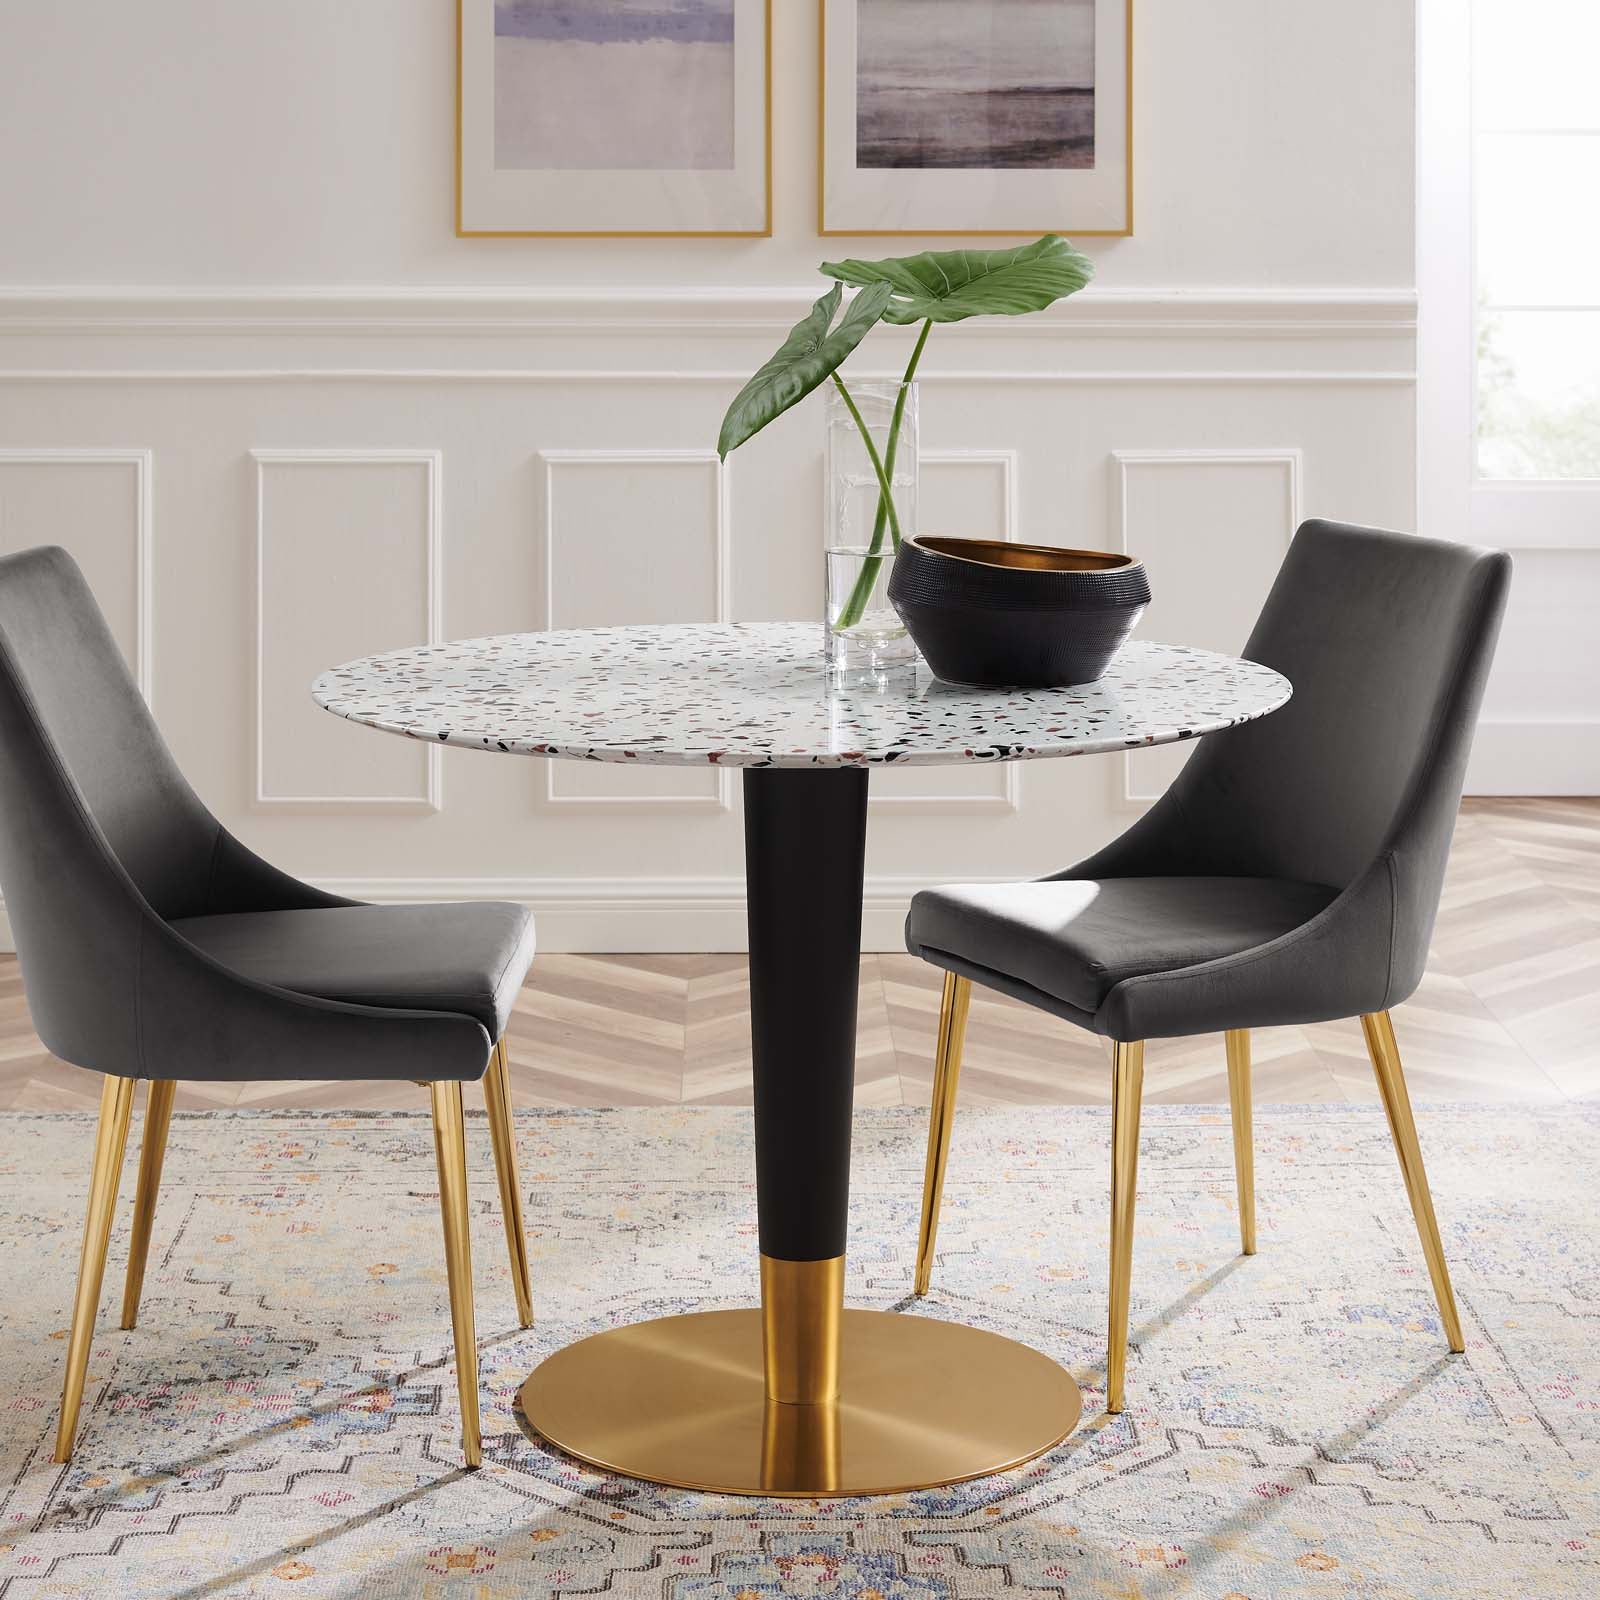 Zinque 40" Round Terrazzo Dining Table - East Shore Modern Home Furnishings